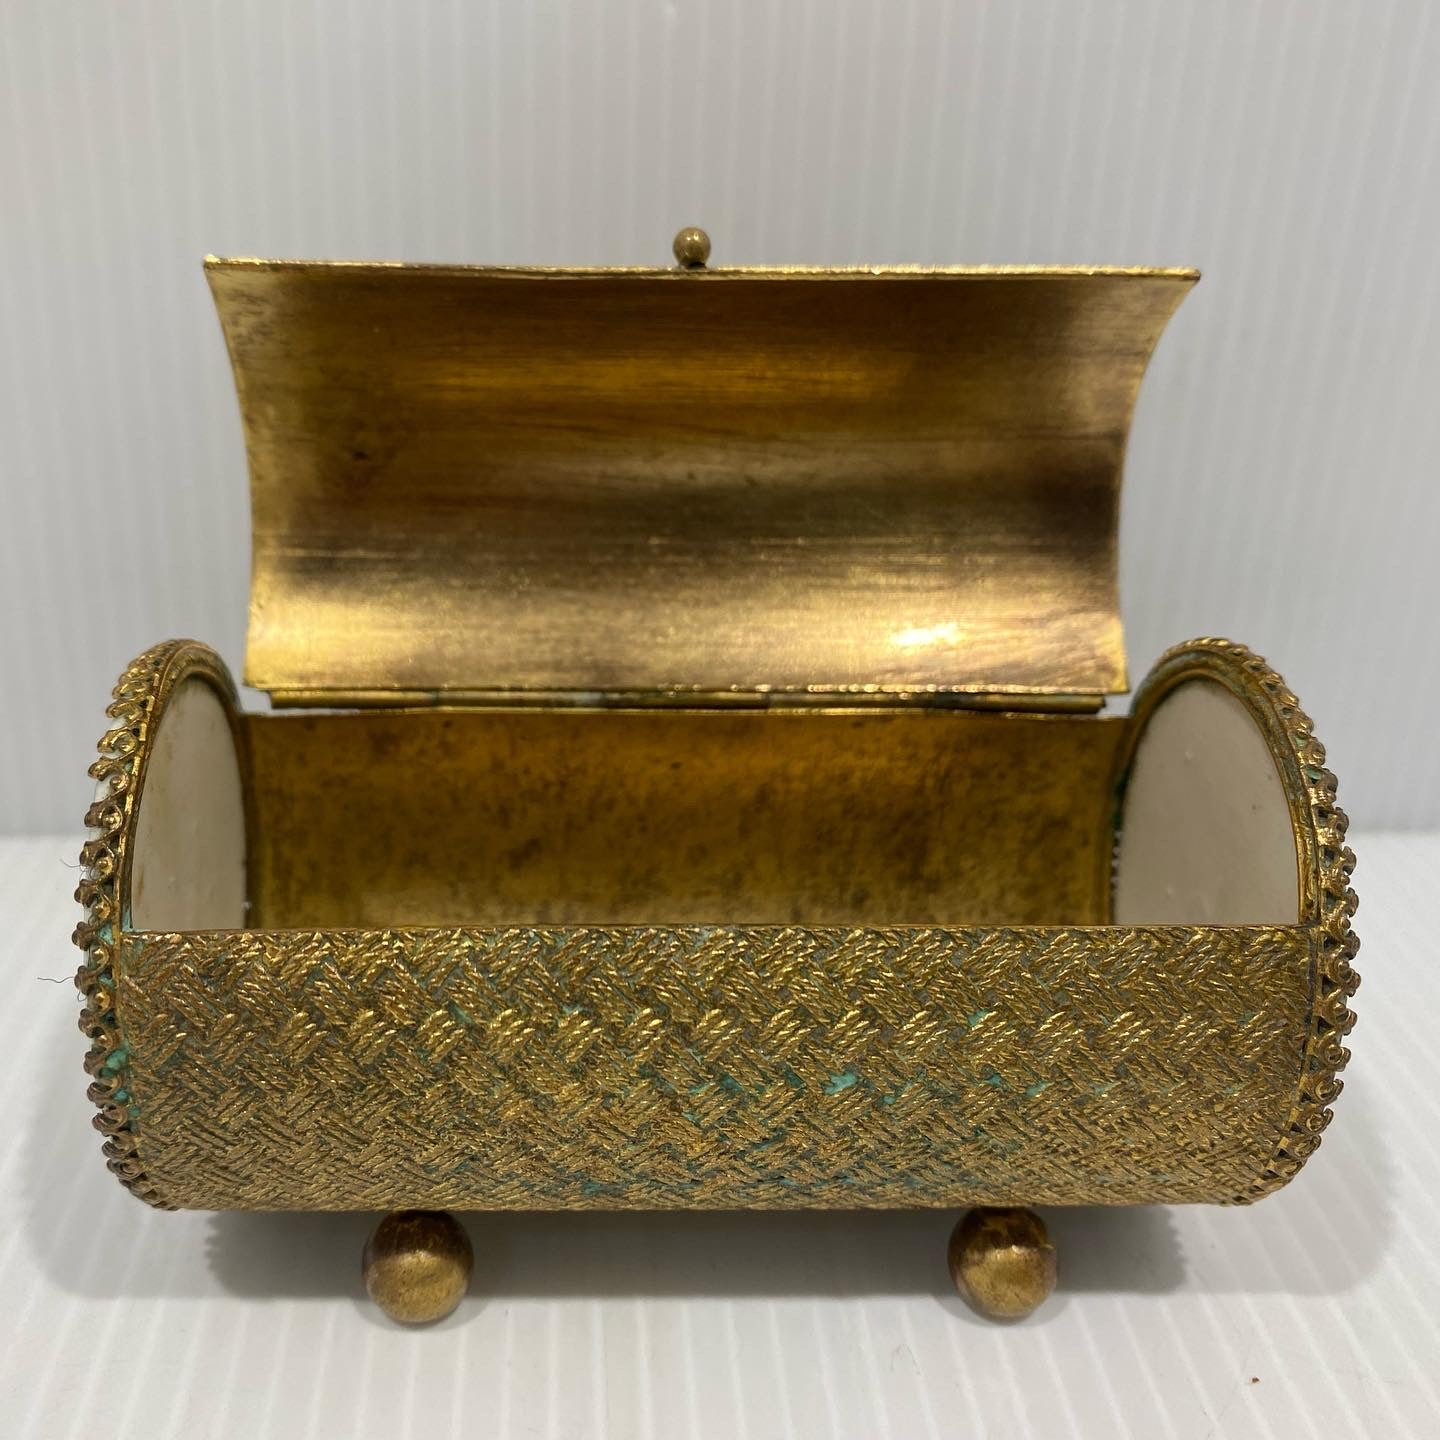 Beautiful and rare art deco, brass and enamel,  Sarcophagus shaped poker chip holder.